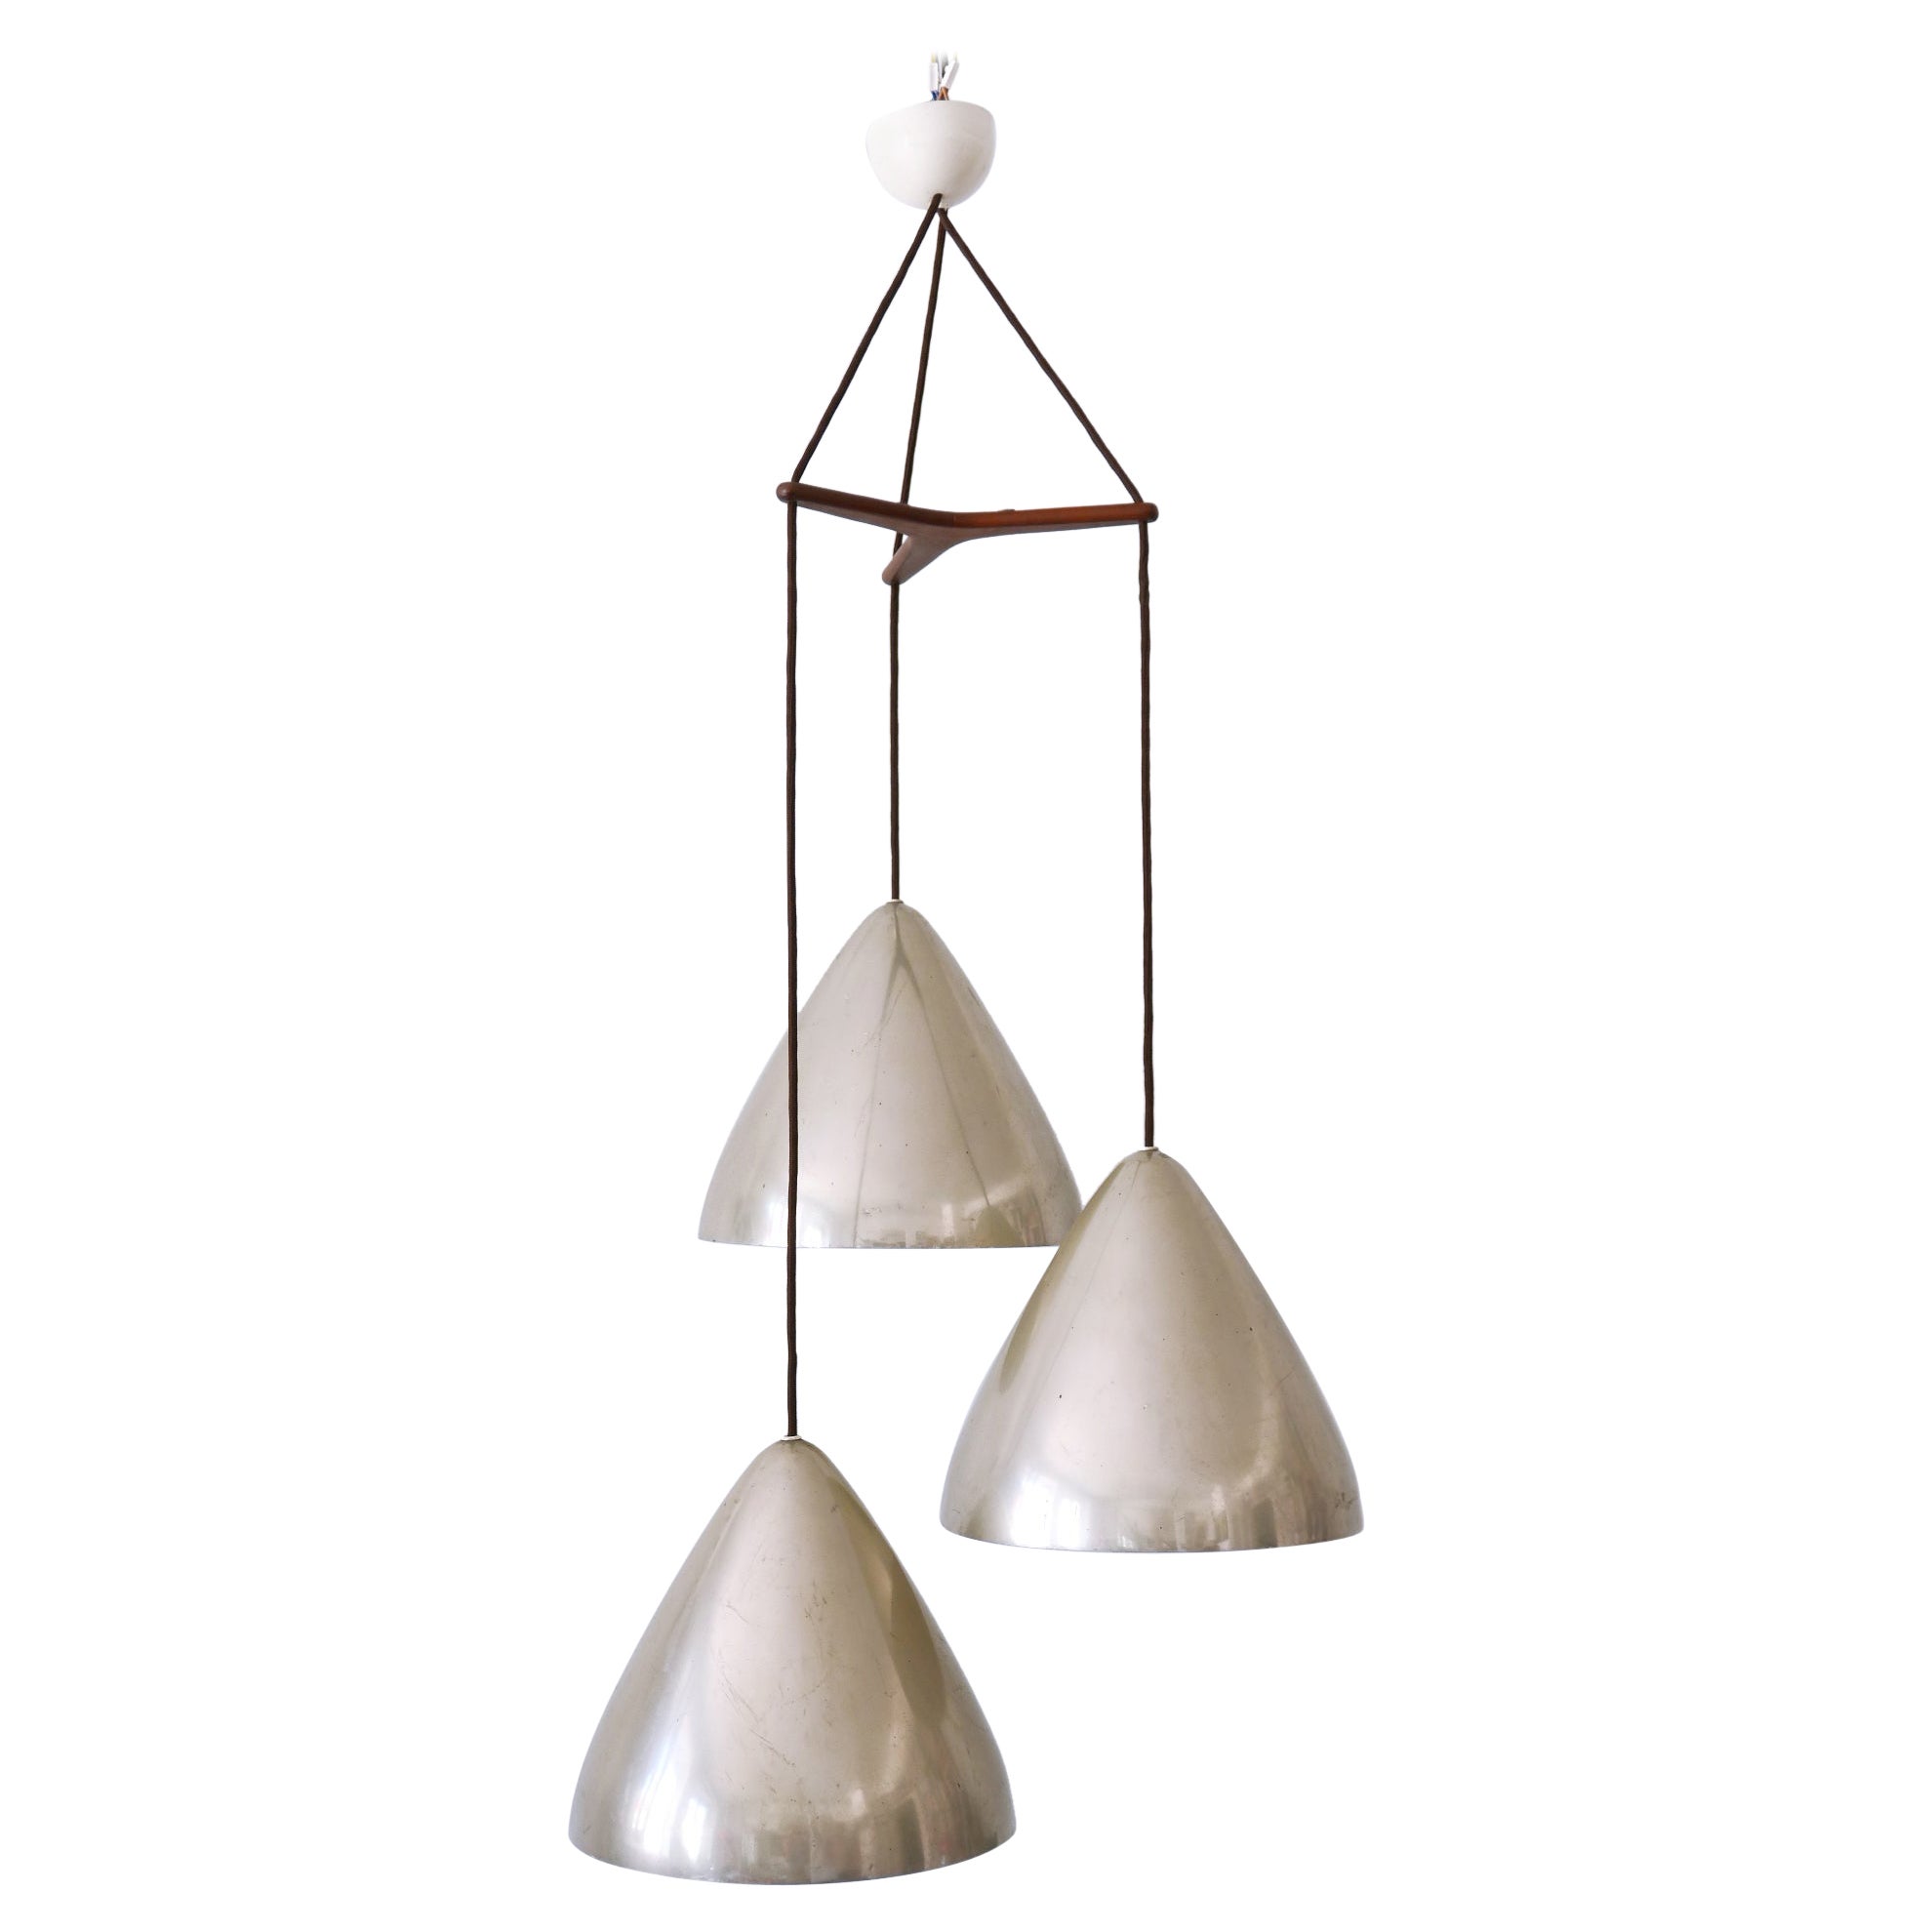 Elegant Cascading Pendant Lamp by Lisa Johansson-Pape for Orno Finland 1960s For Sale